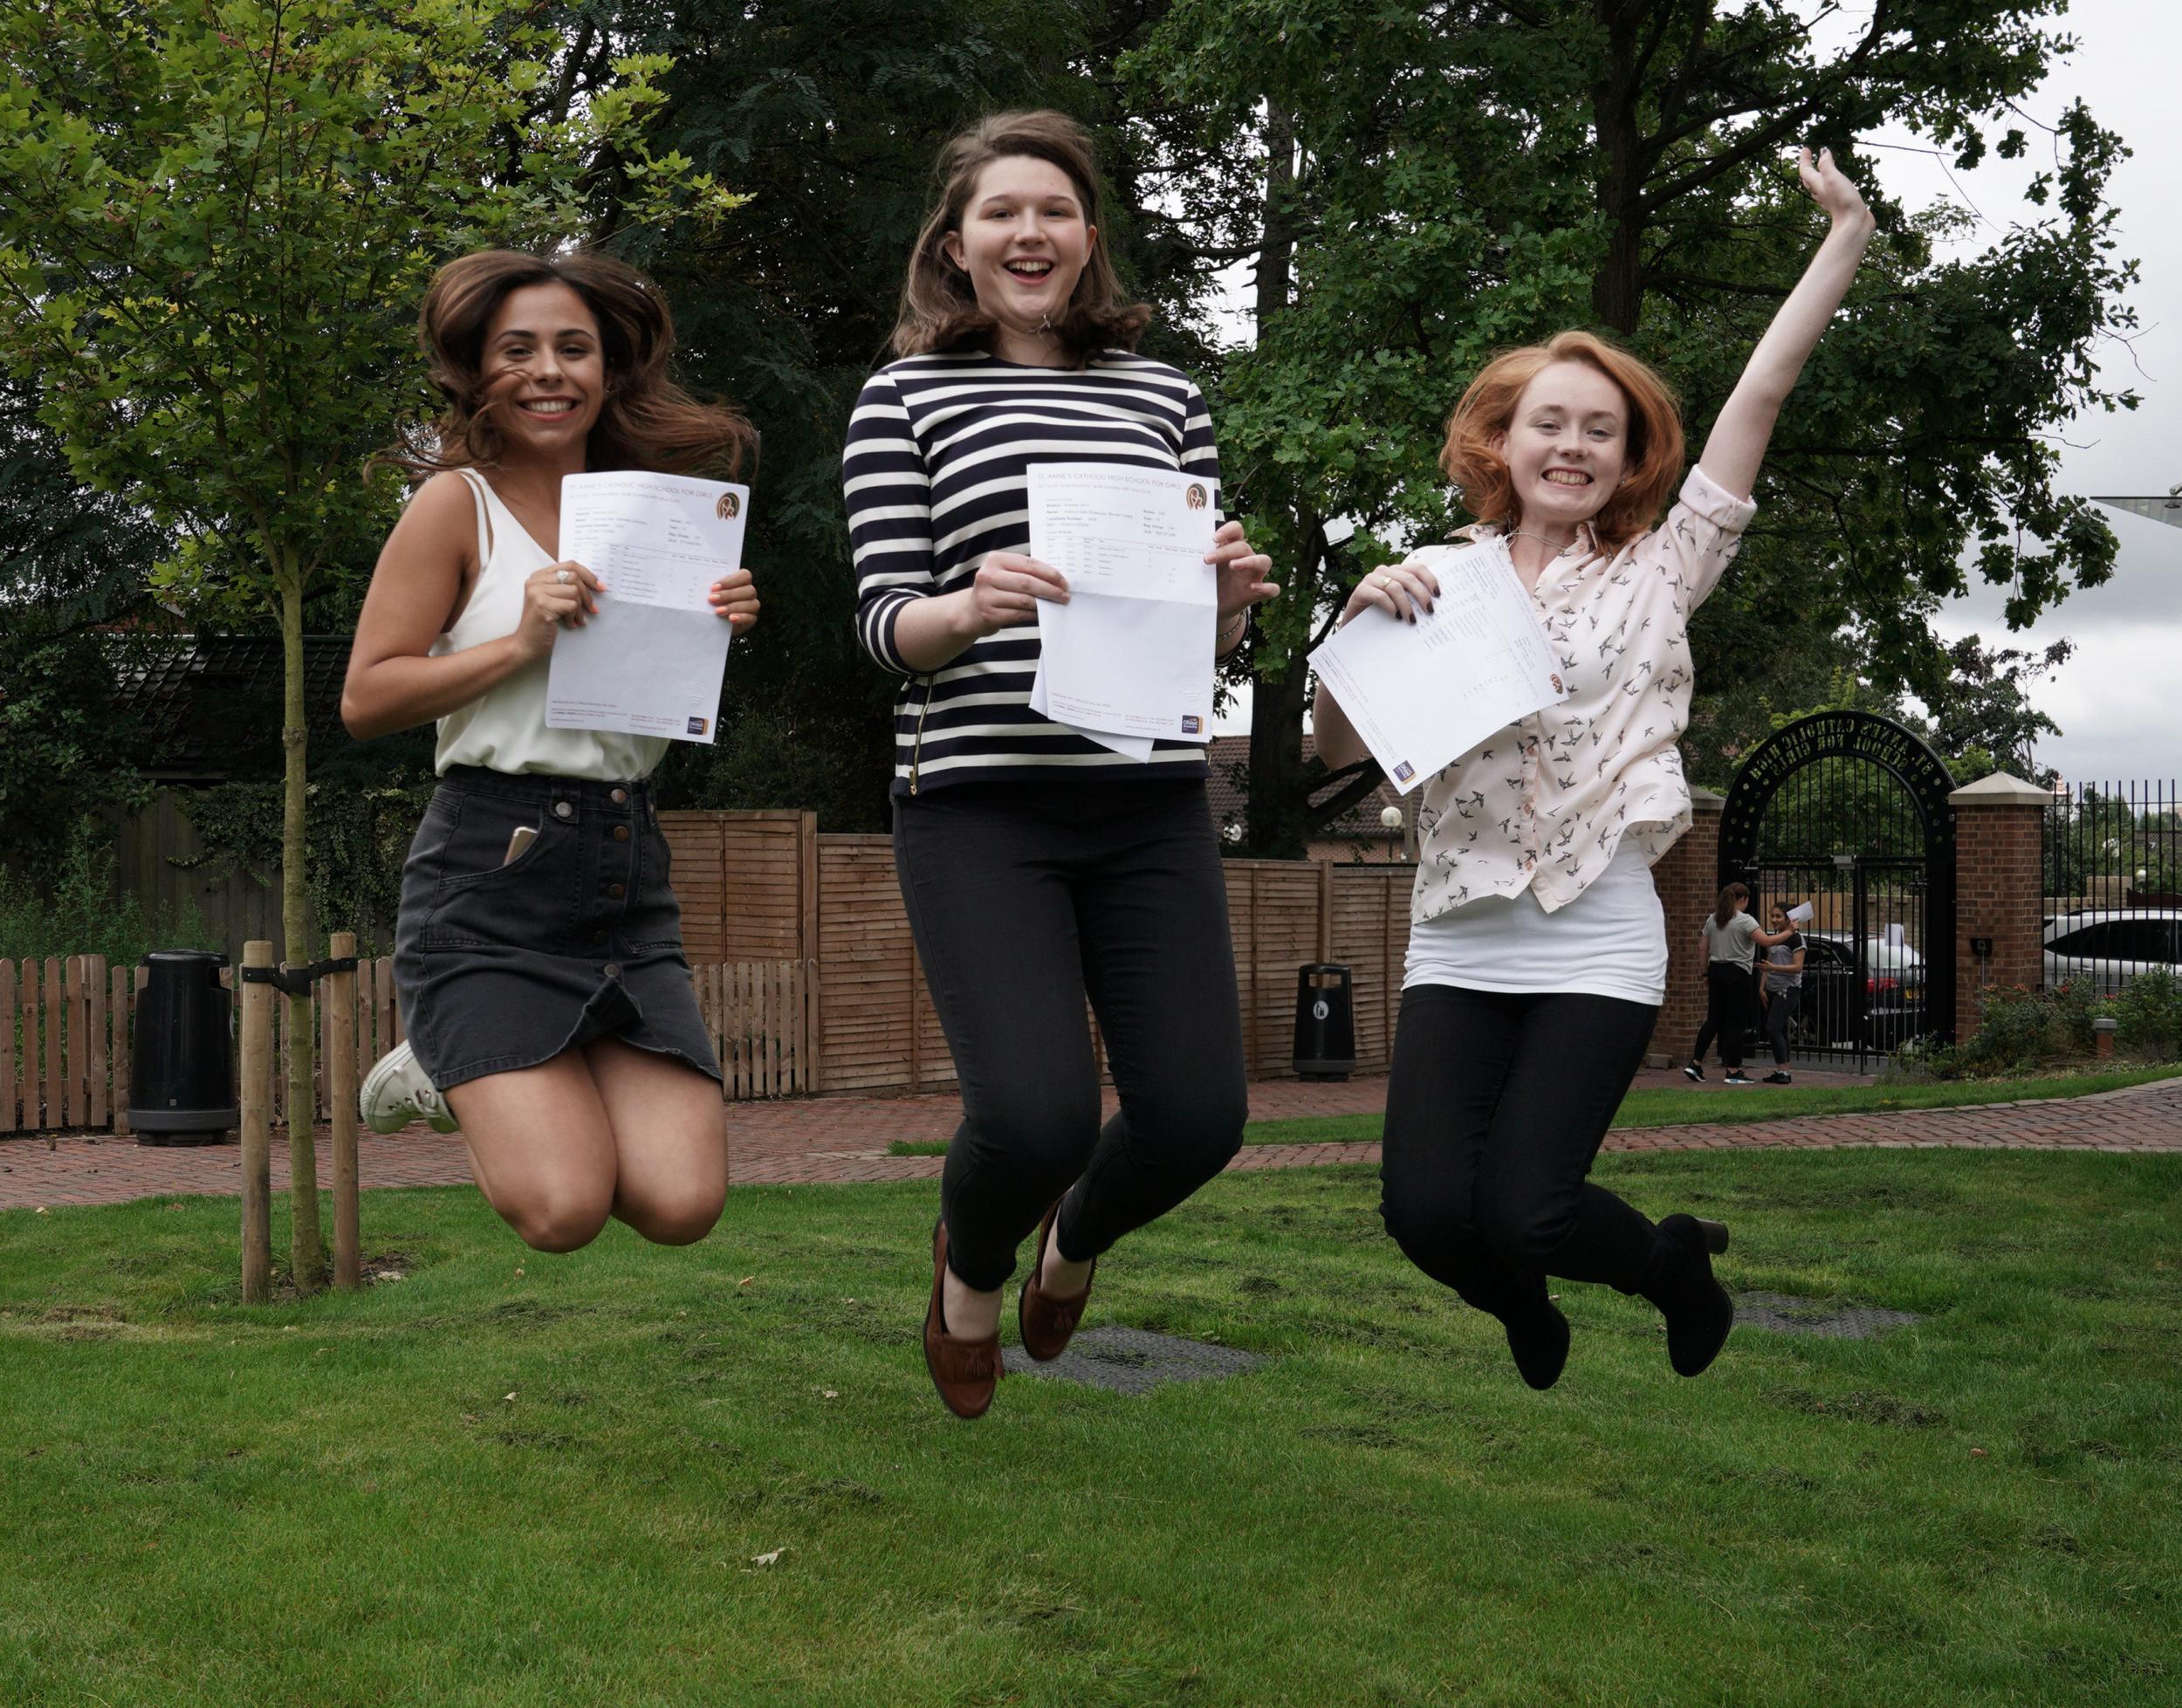 Students across the country will receive their A-level results next week